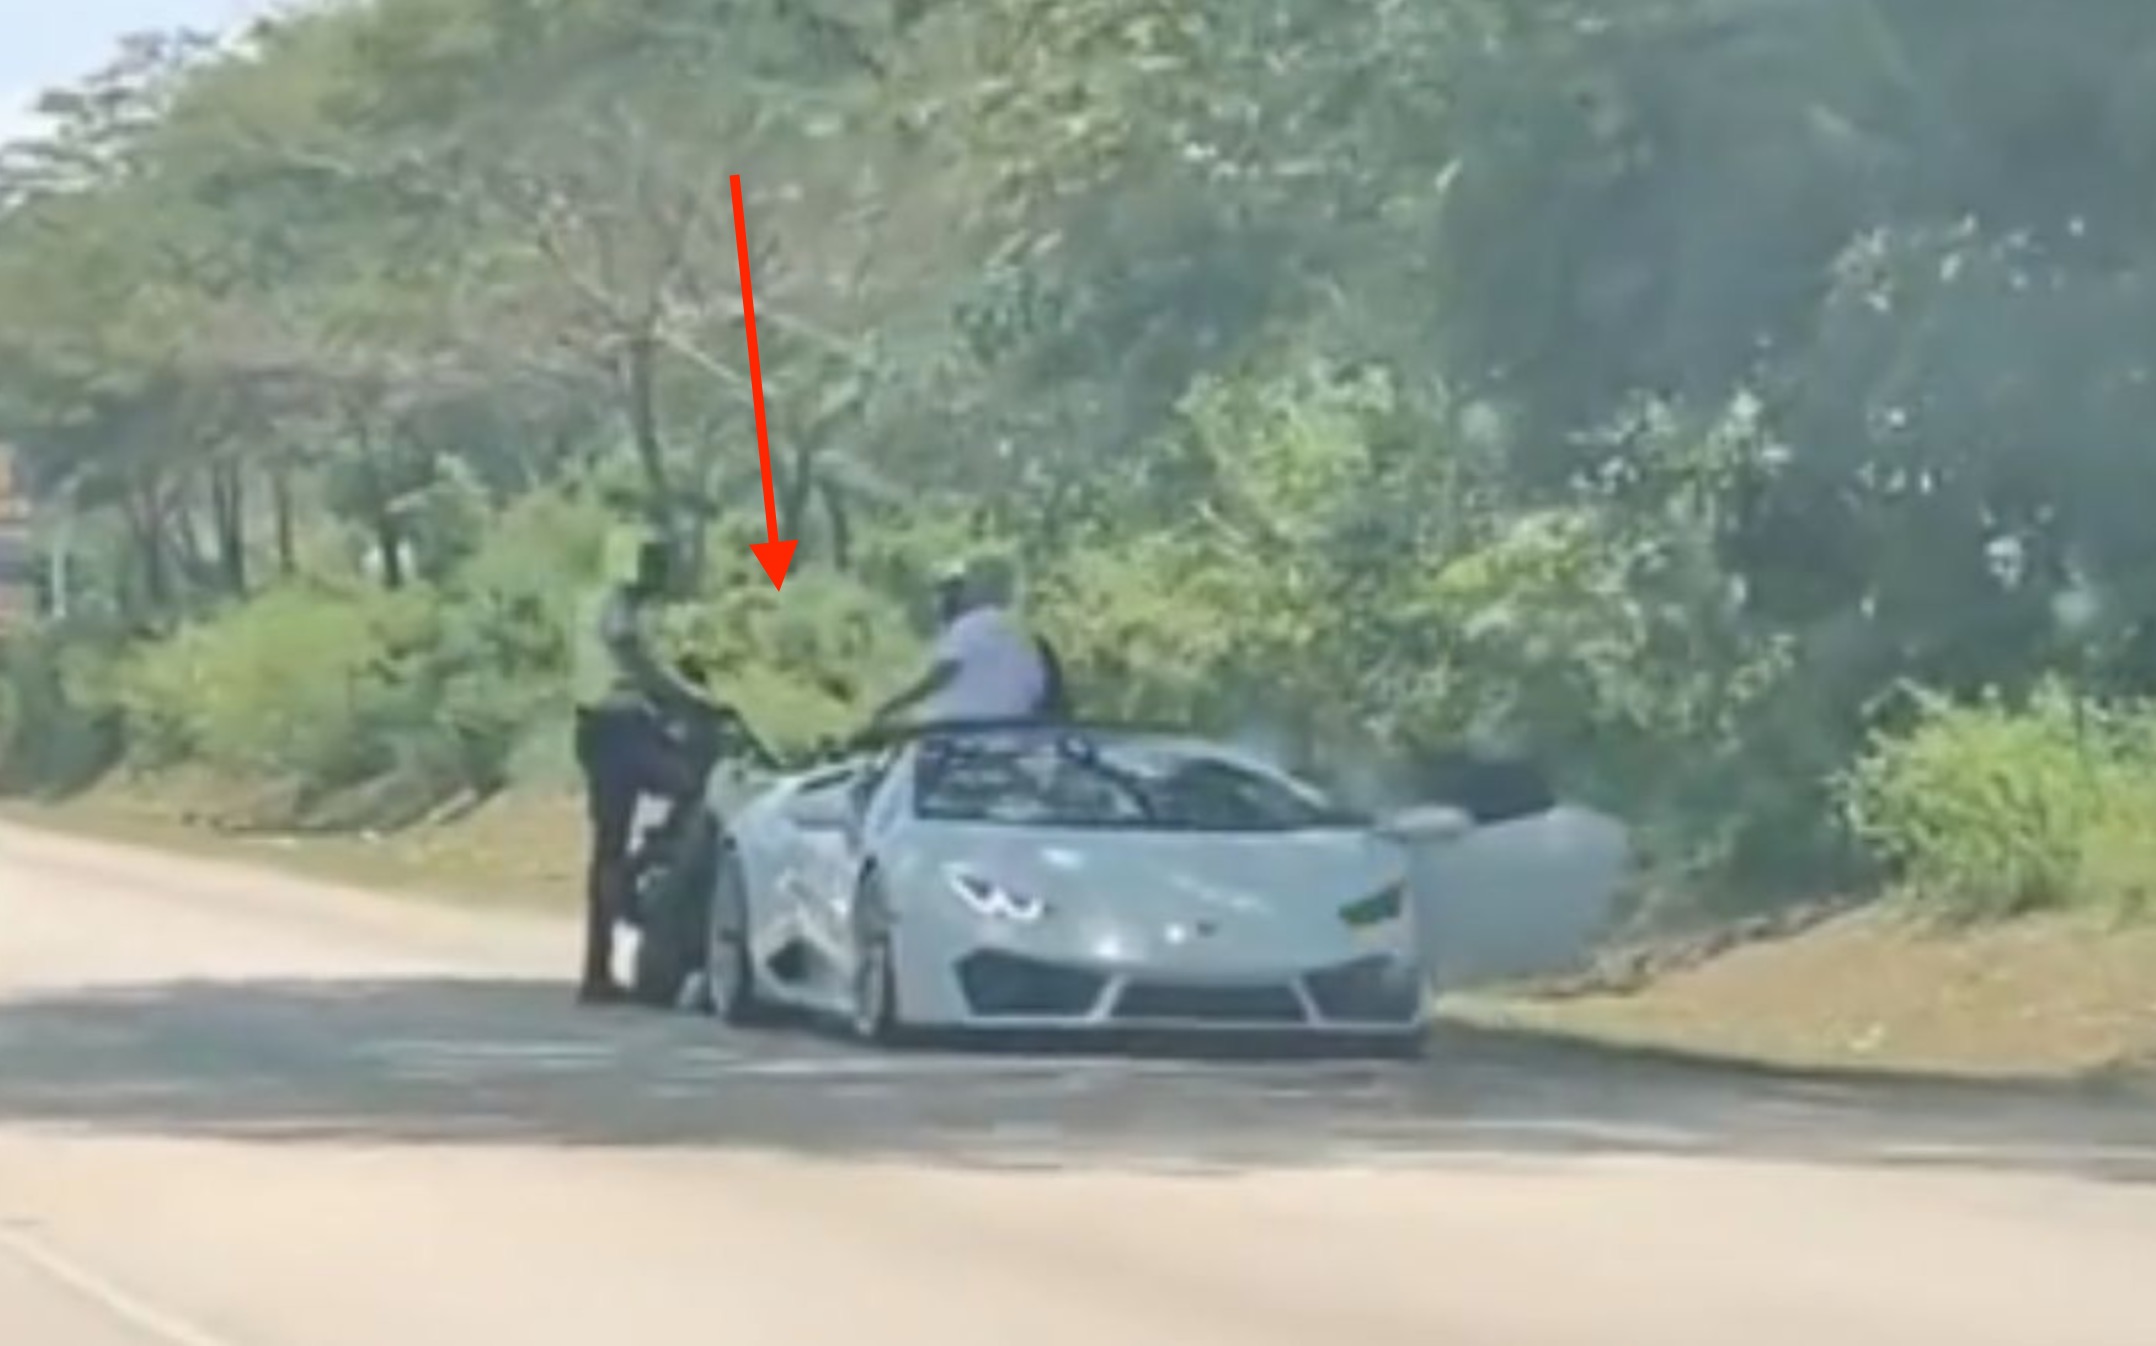 St. Ann Police Officer Reportedly Caught on Camera Collecting Money from Lamborghini Car Driver - Watch Video